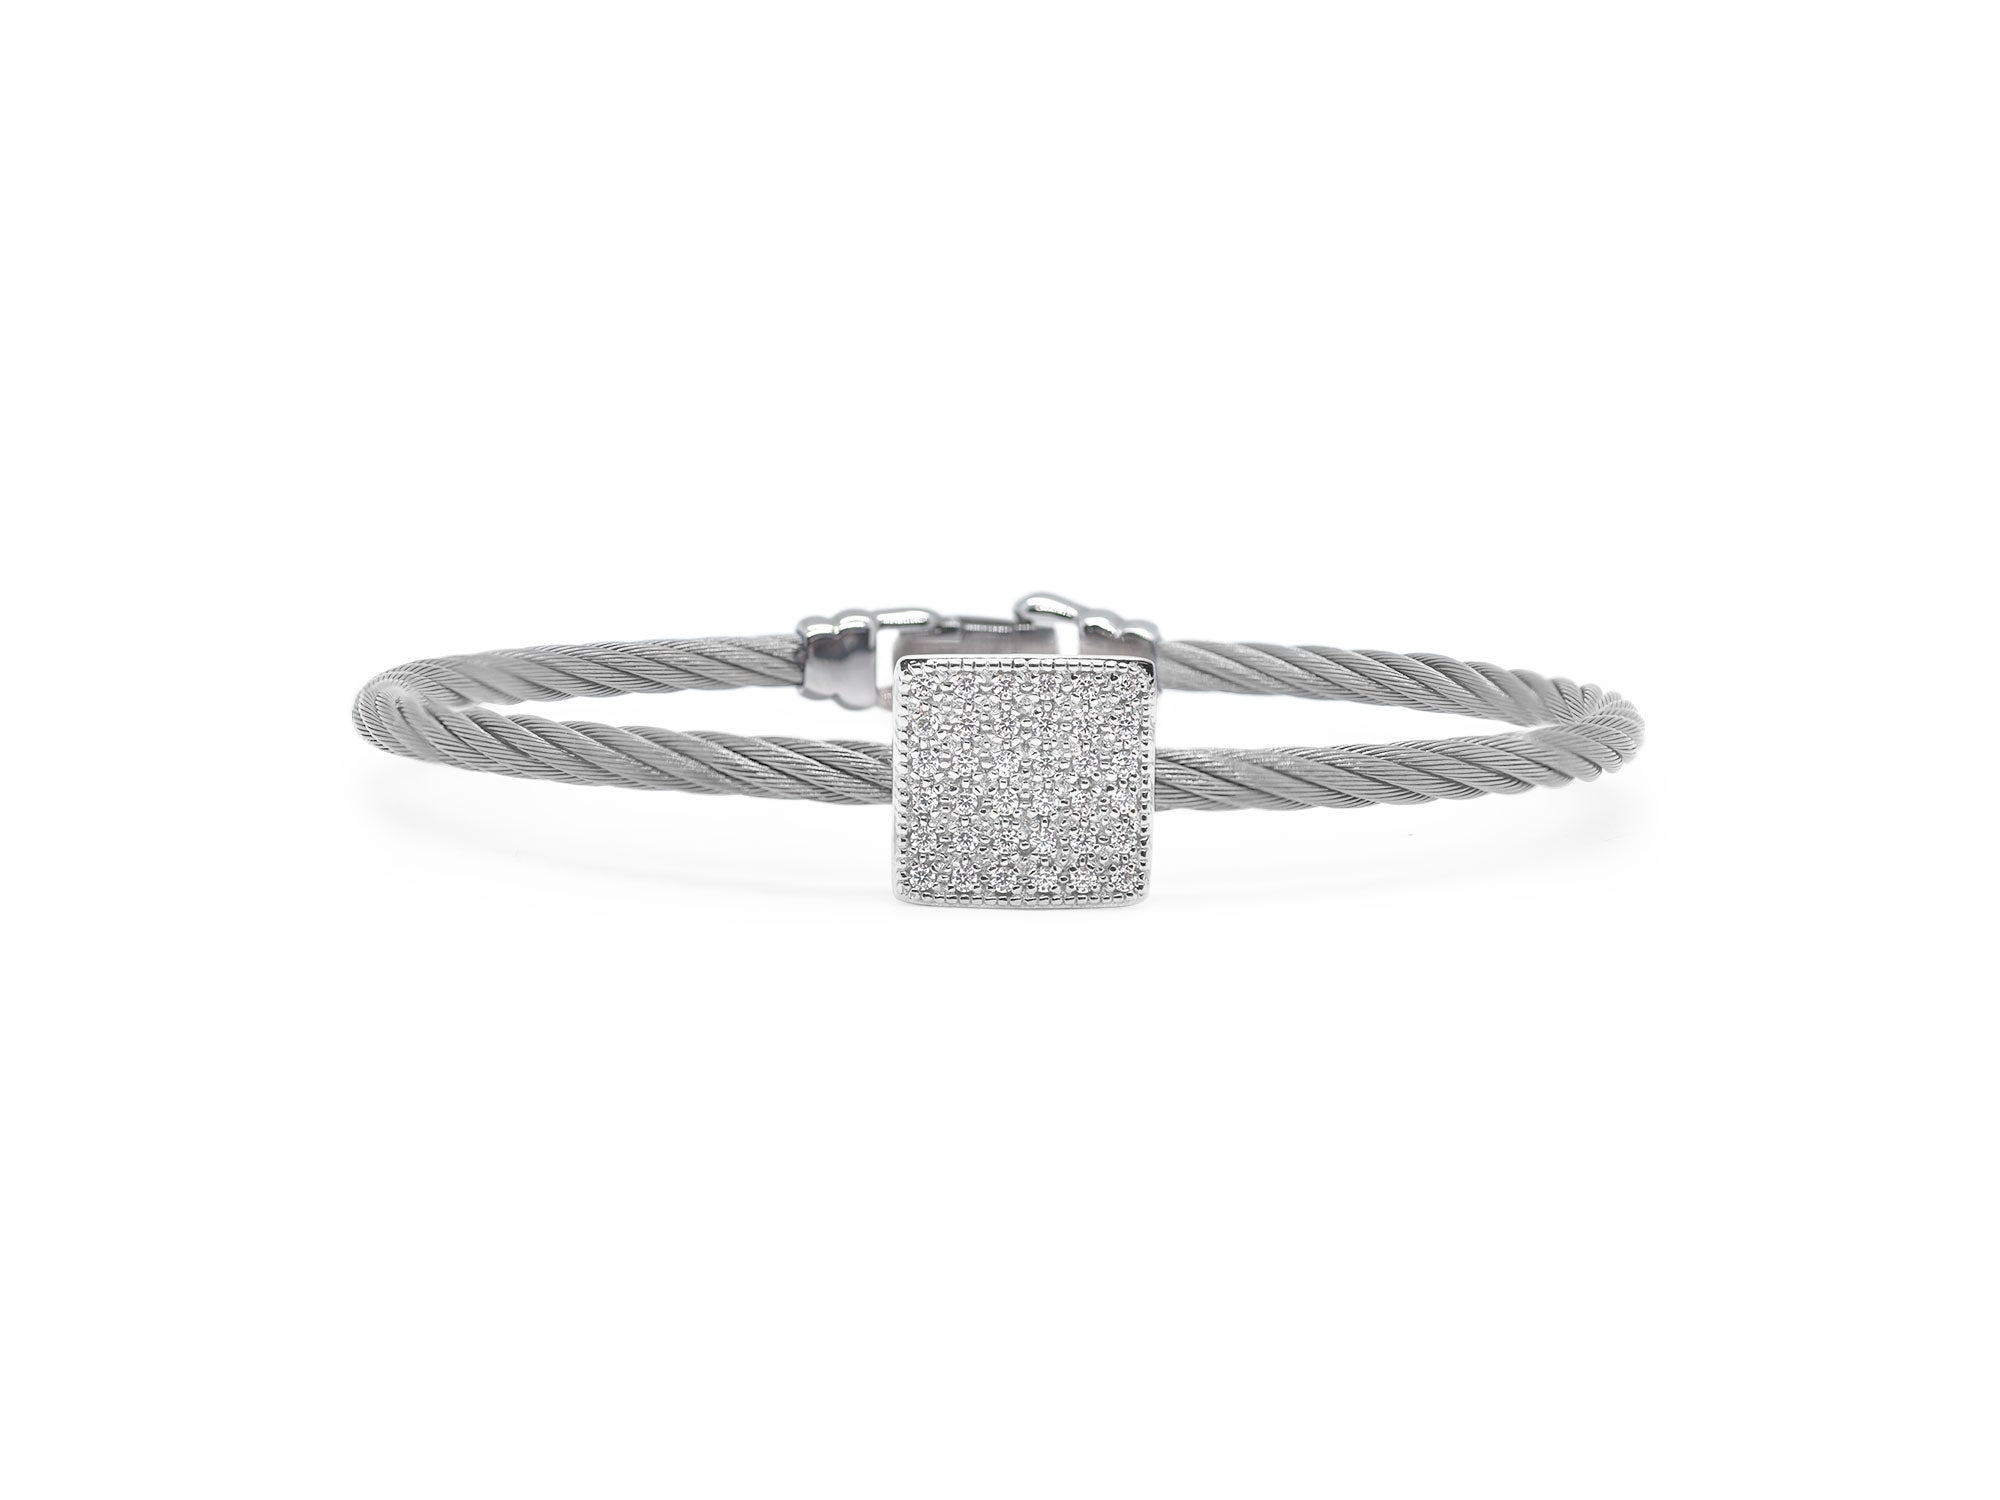 Grey Cable Taking Shapes Square Bracelet with 18K Gold & Diamonds